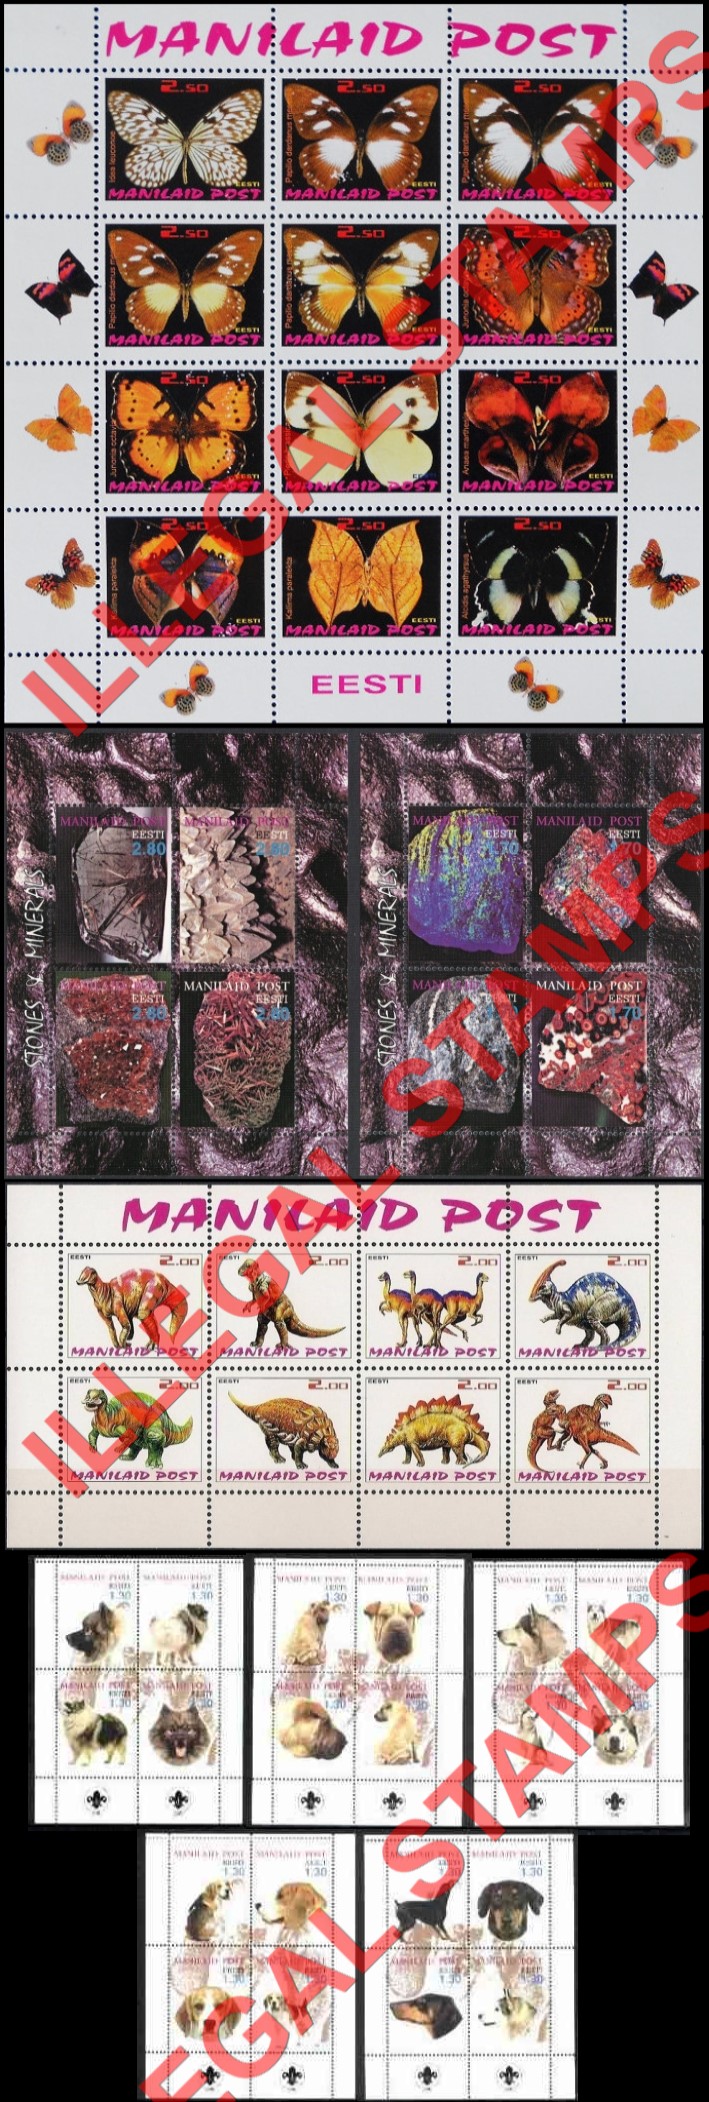 Manilaid Post Dogs, Minerals, Dinosaurs and Butterflies Illegal Stamps